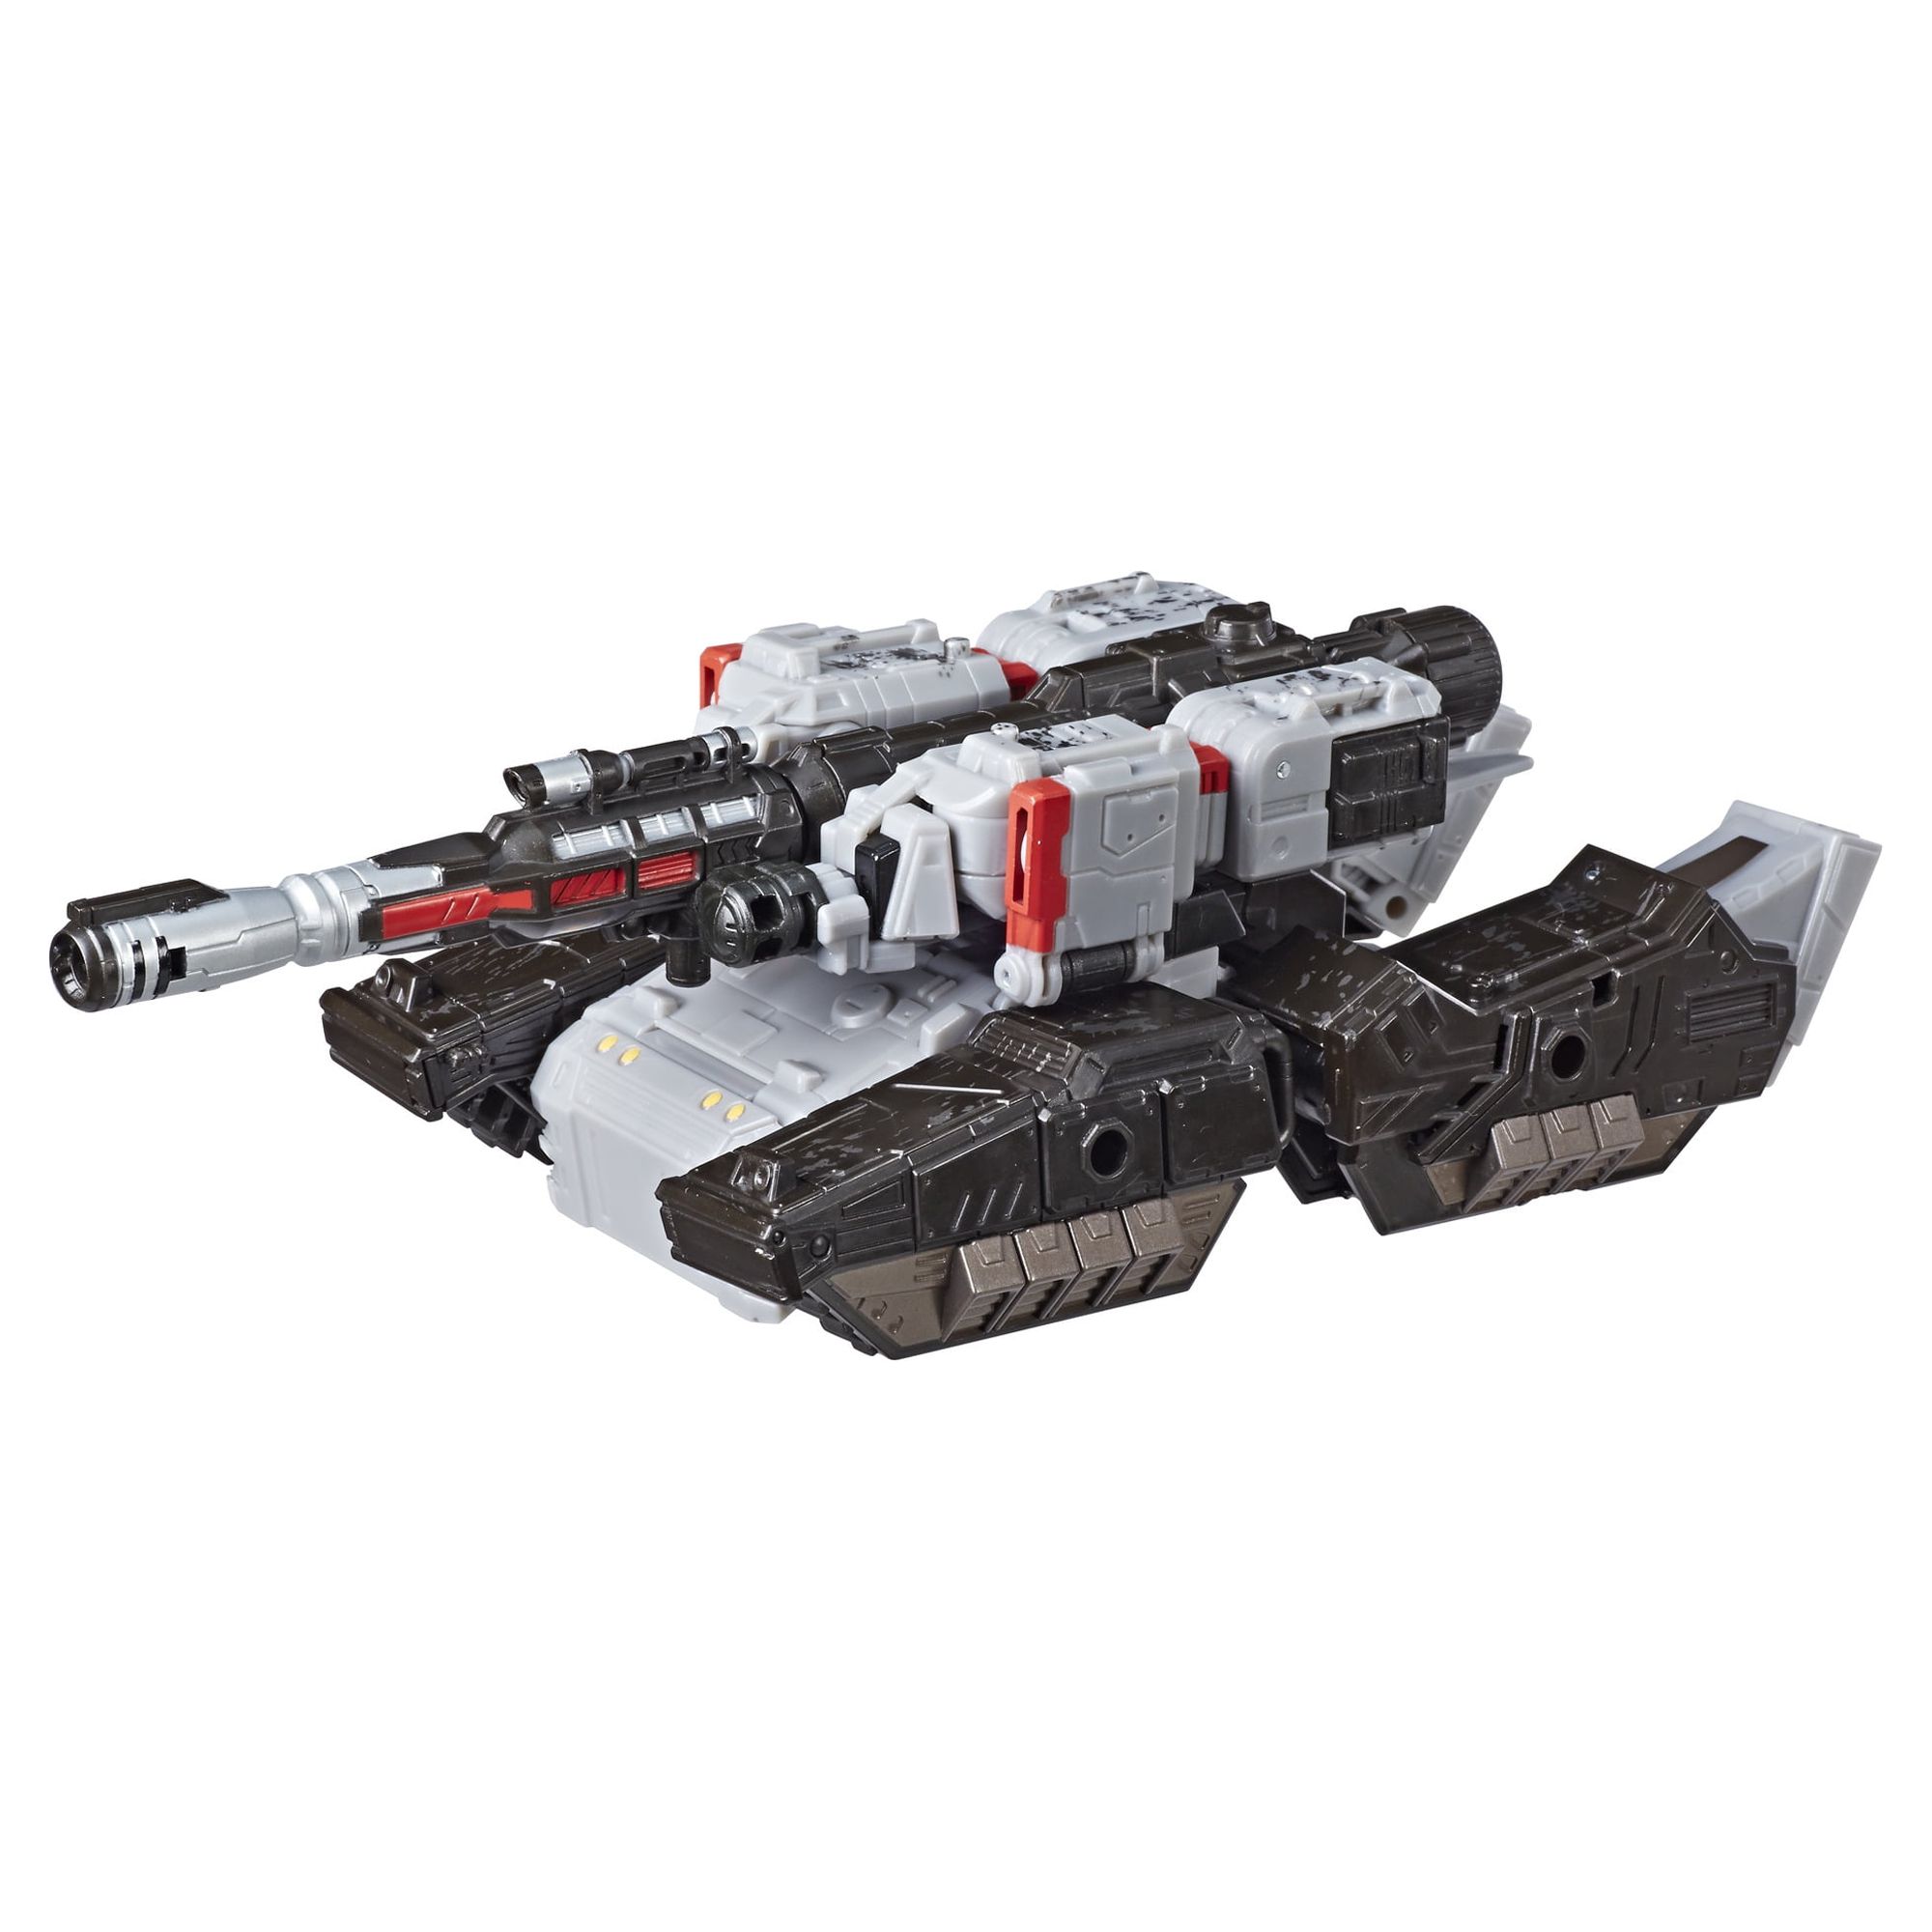 Transformers Generations War for Cybertron: Siege Voyager Class WFC-S12 Megatron - image 4 of 20